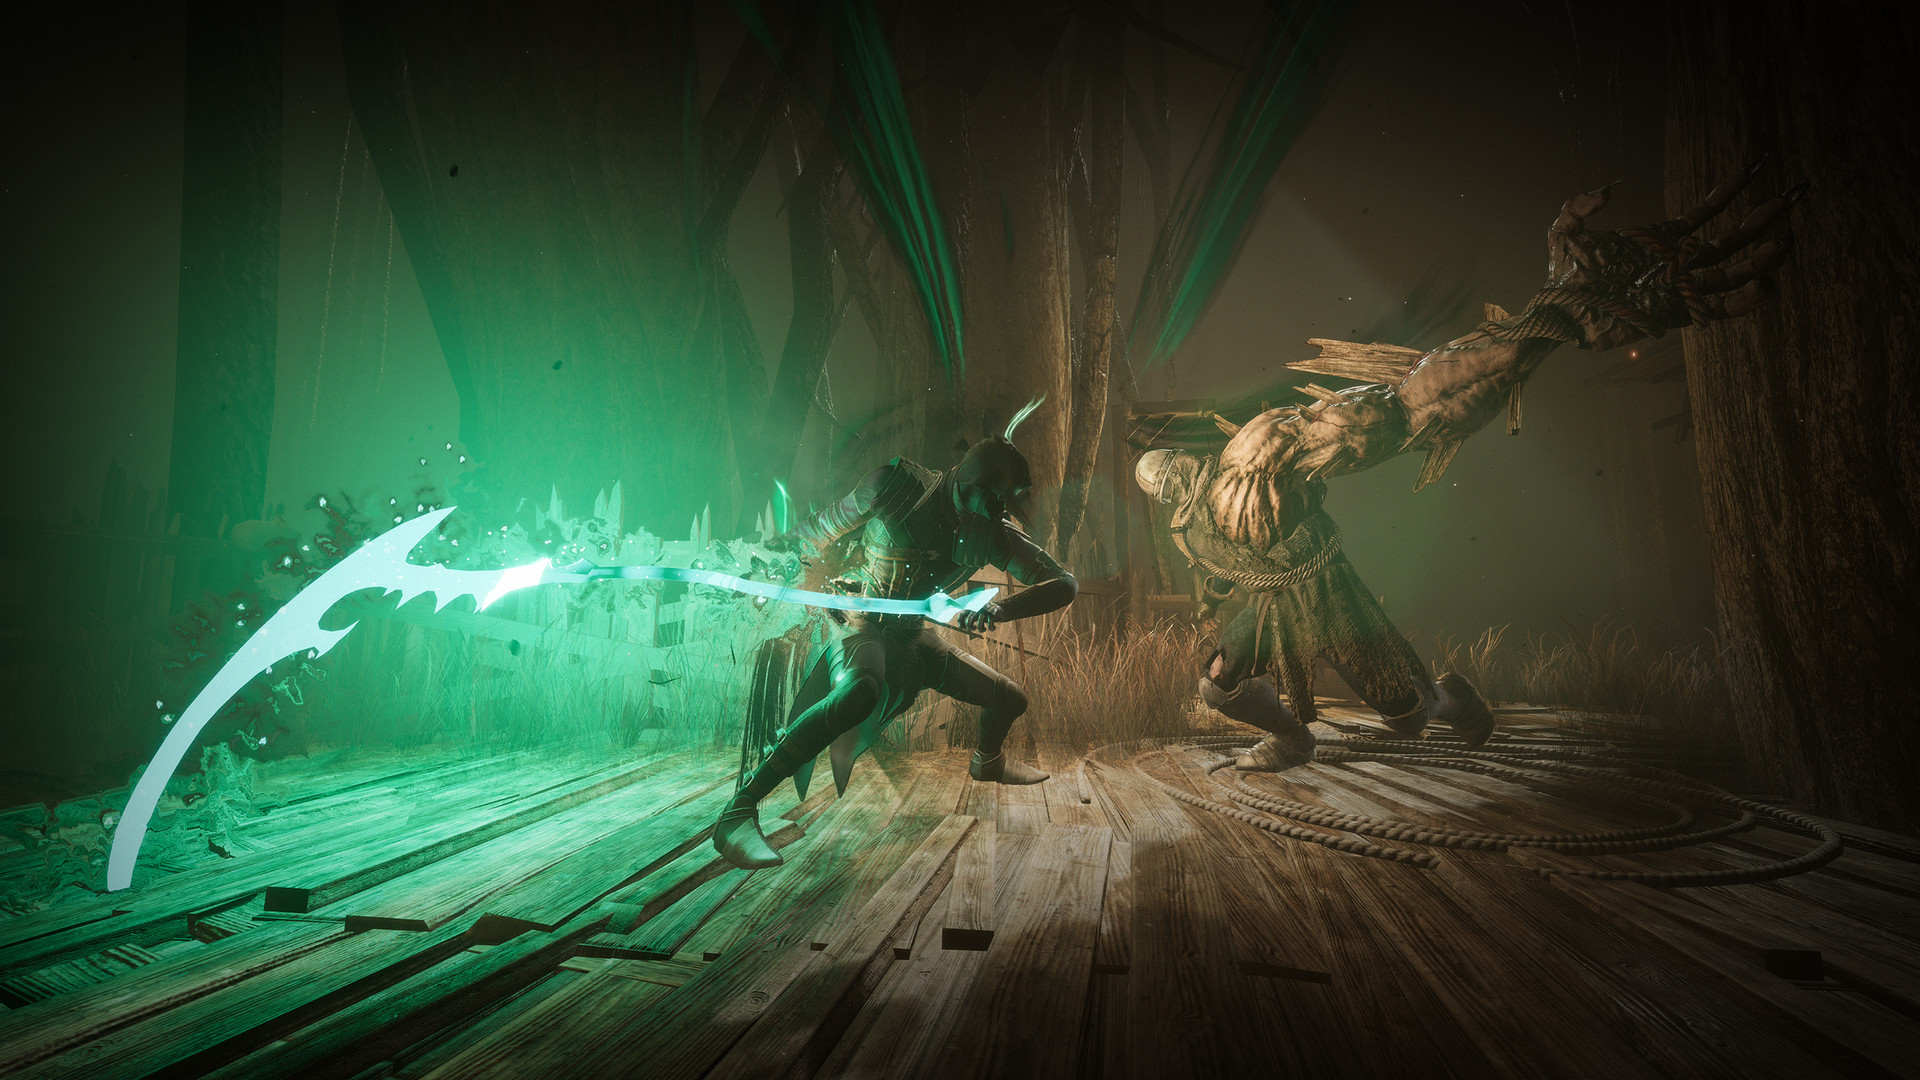 A hooded figure wearing a plague doctor mask takes on a large muscular foe with a glowing green scythe.